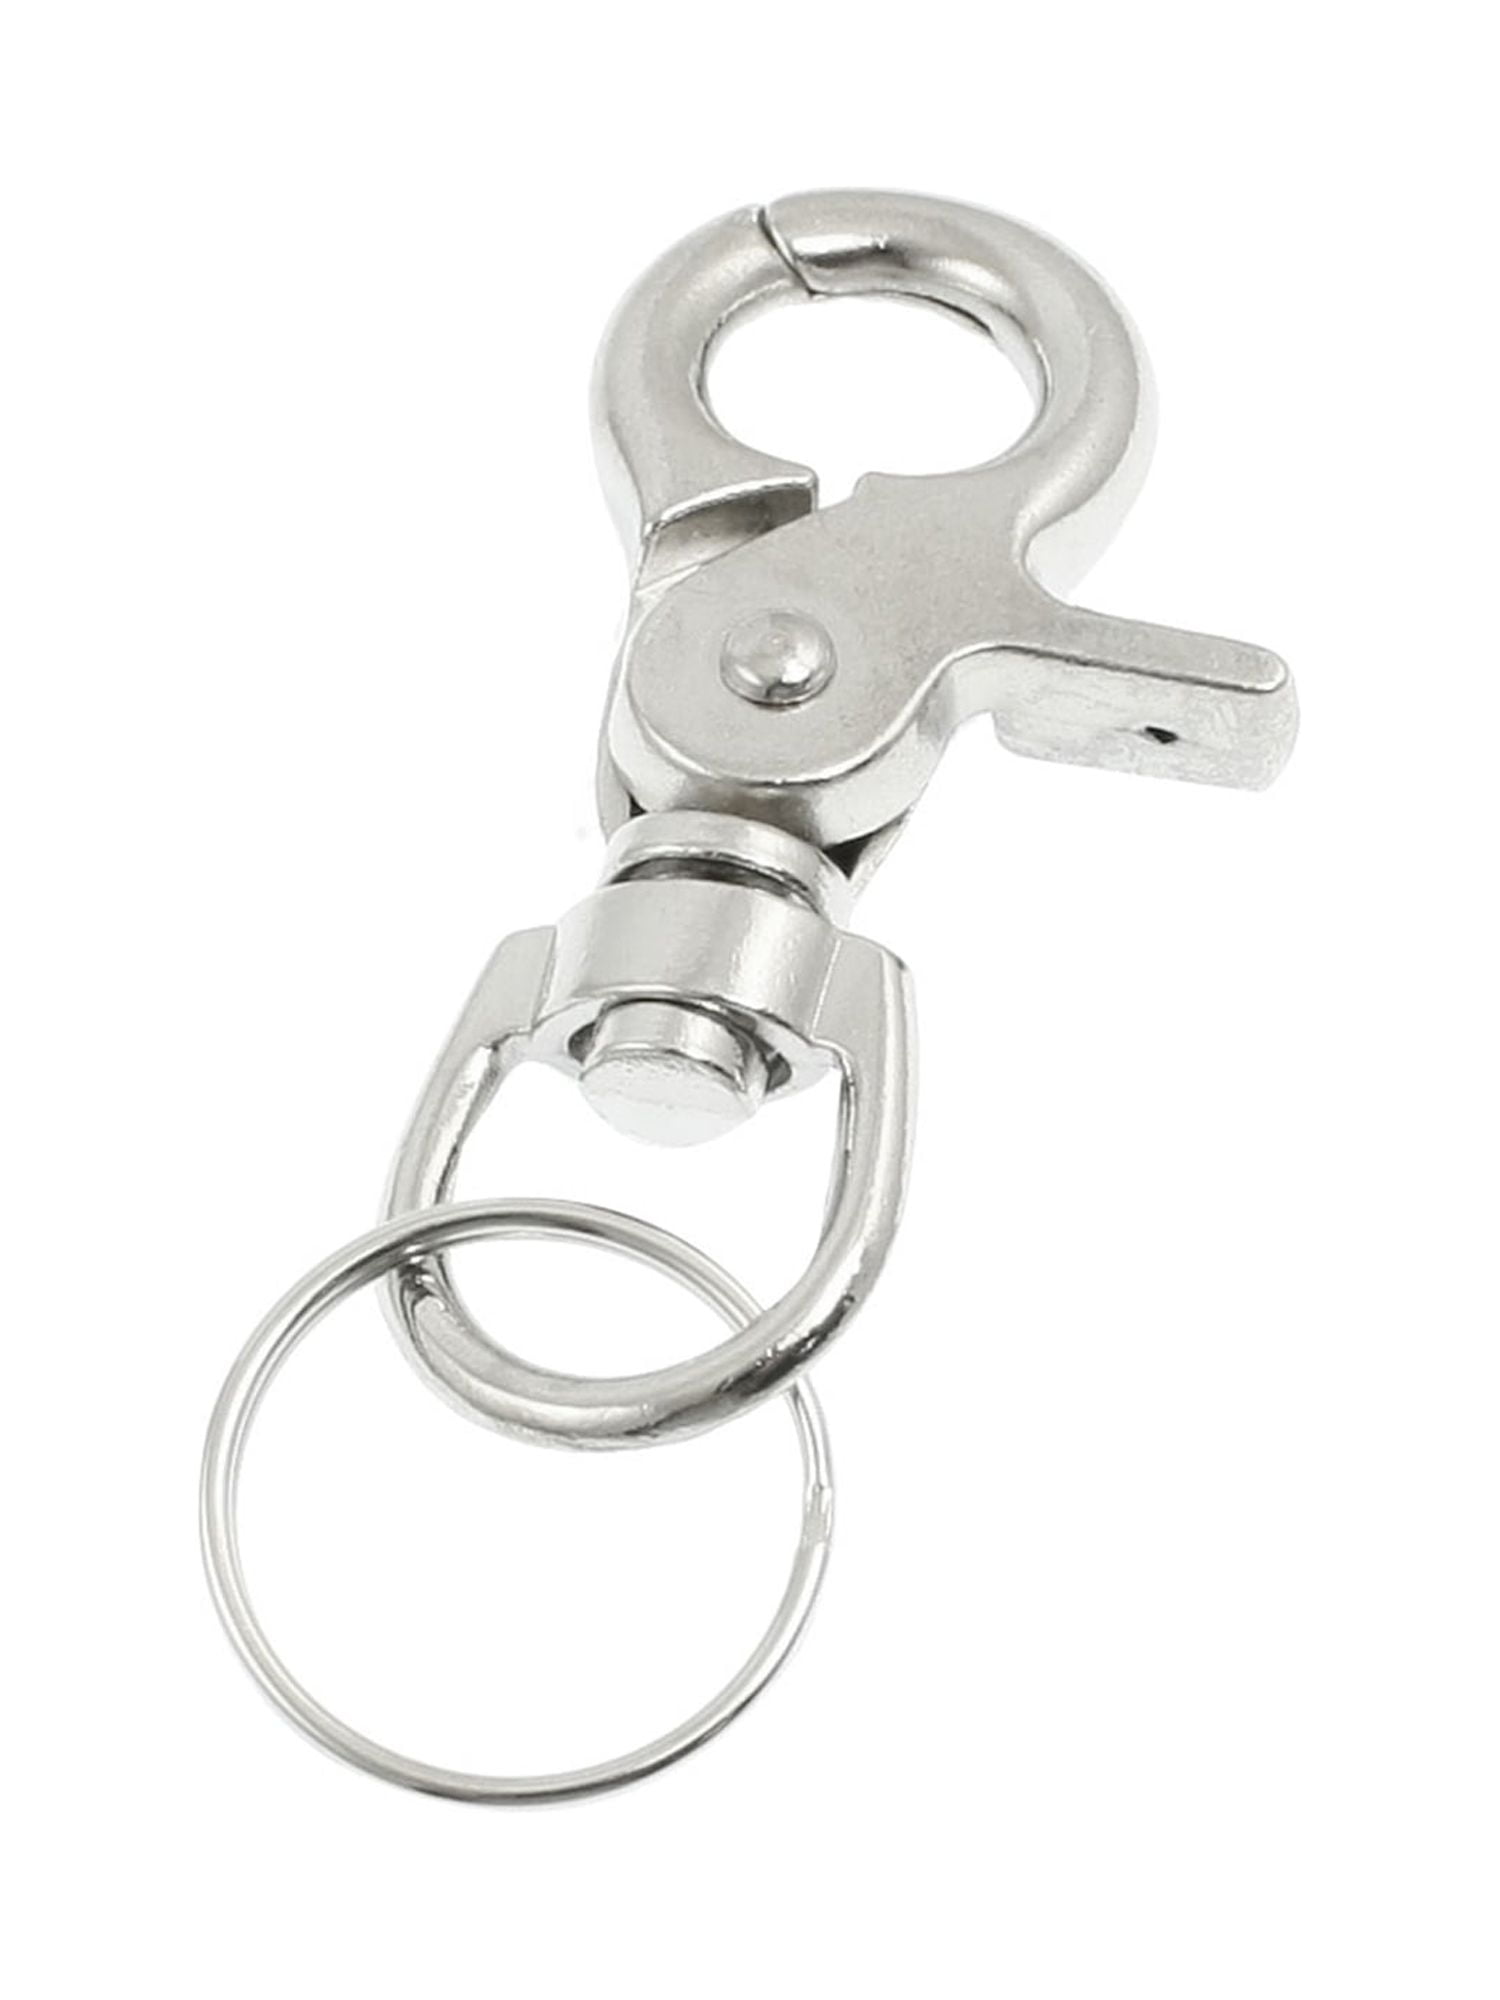 Lobster Clasp Clip Key Ring Keychain Silver Tone for Key Pendant